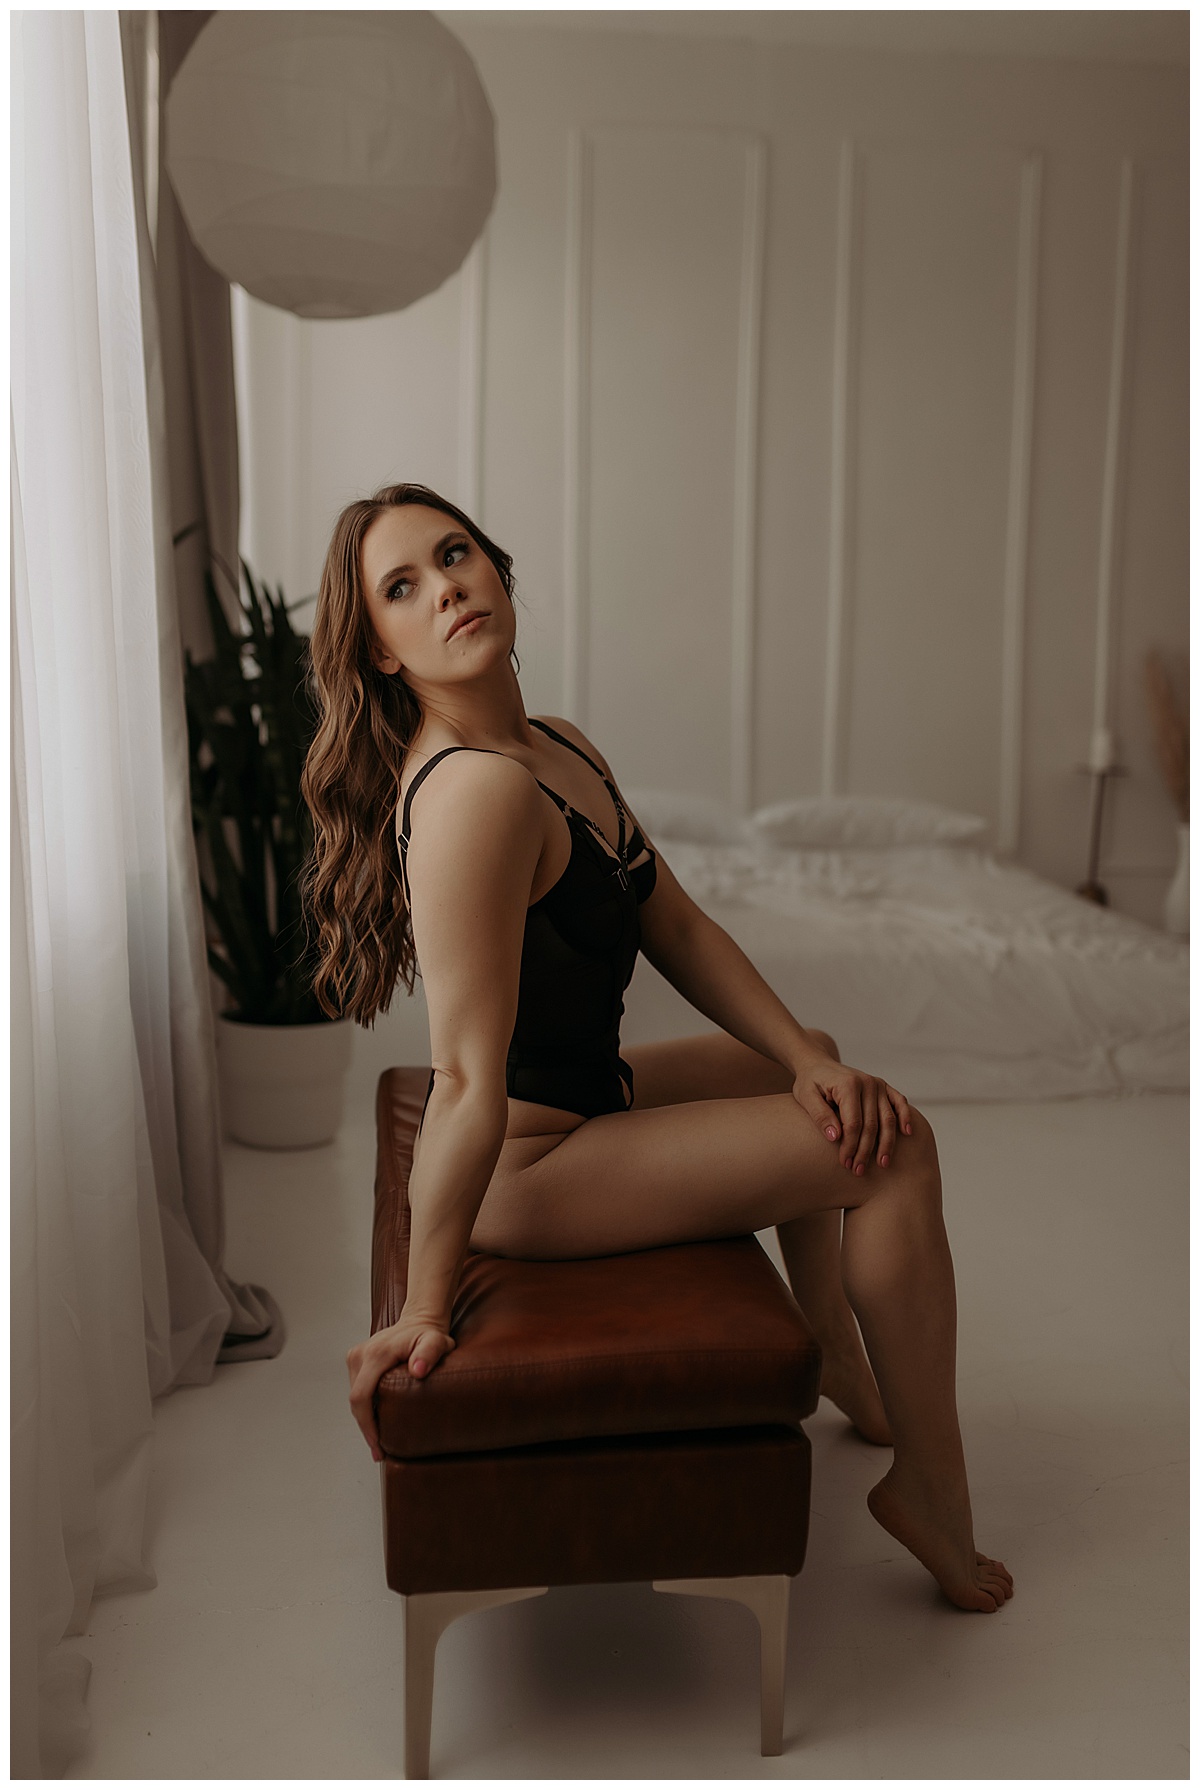 Adult sits on stool wearing black lingerie for Mary Castillo Photography